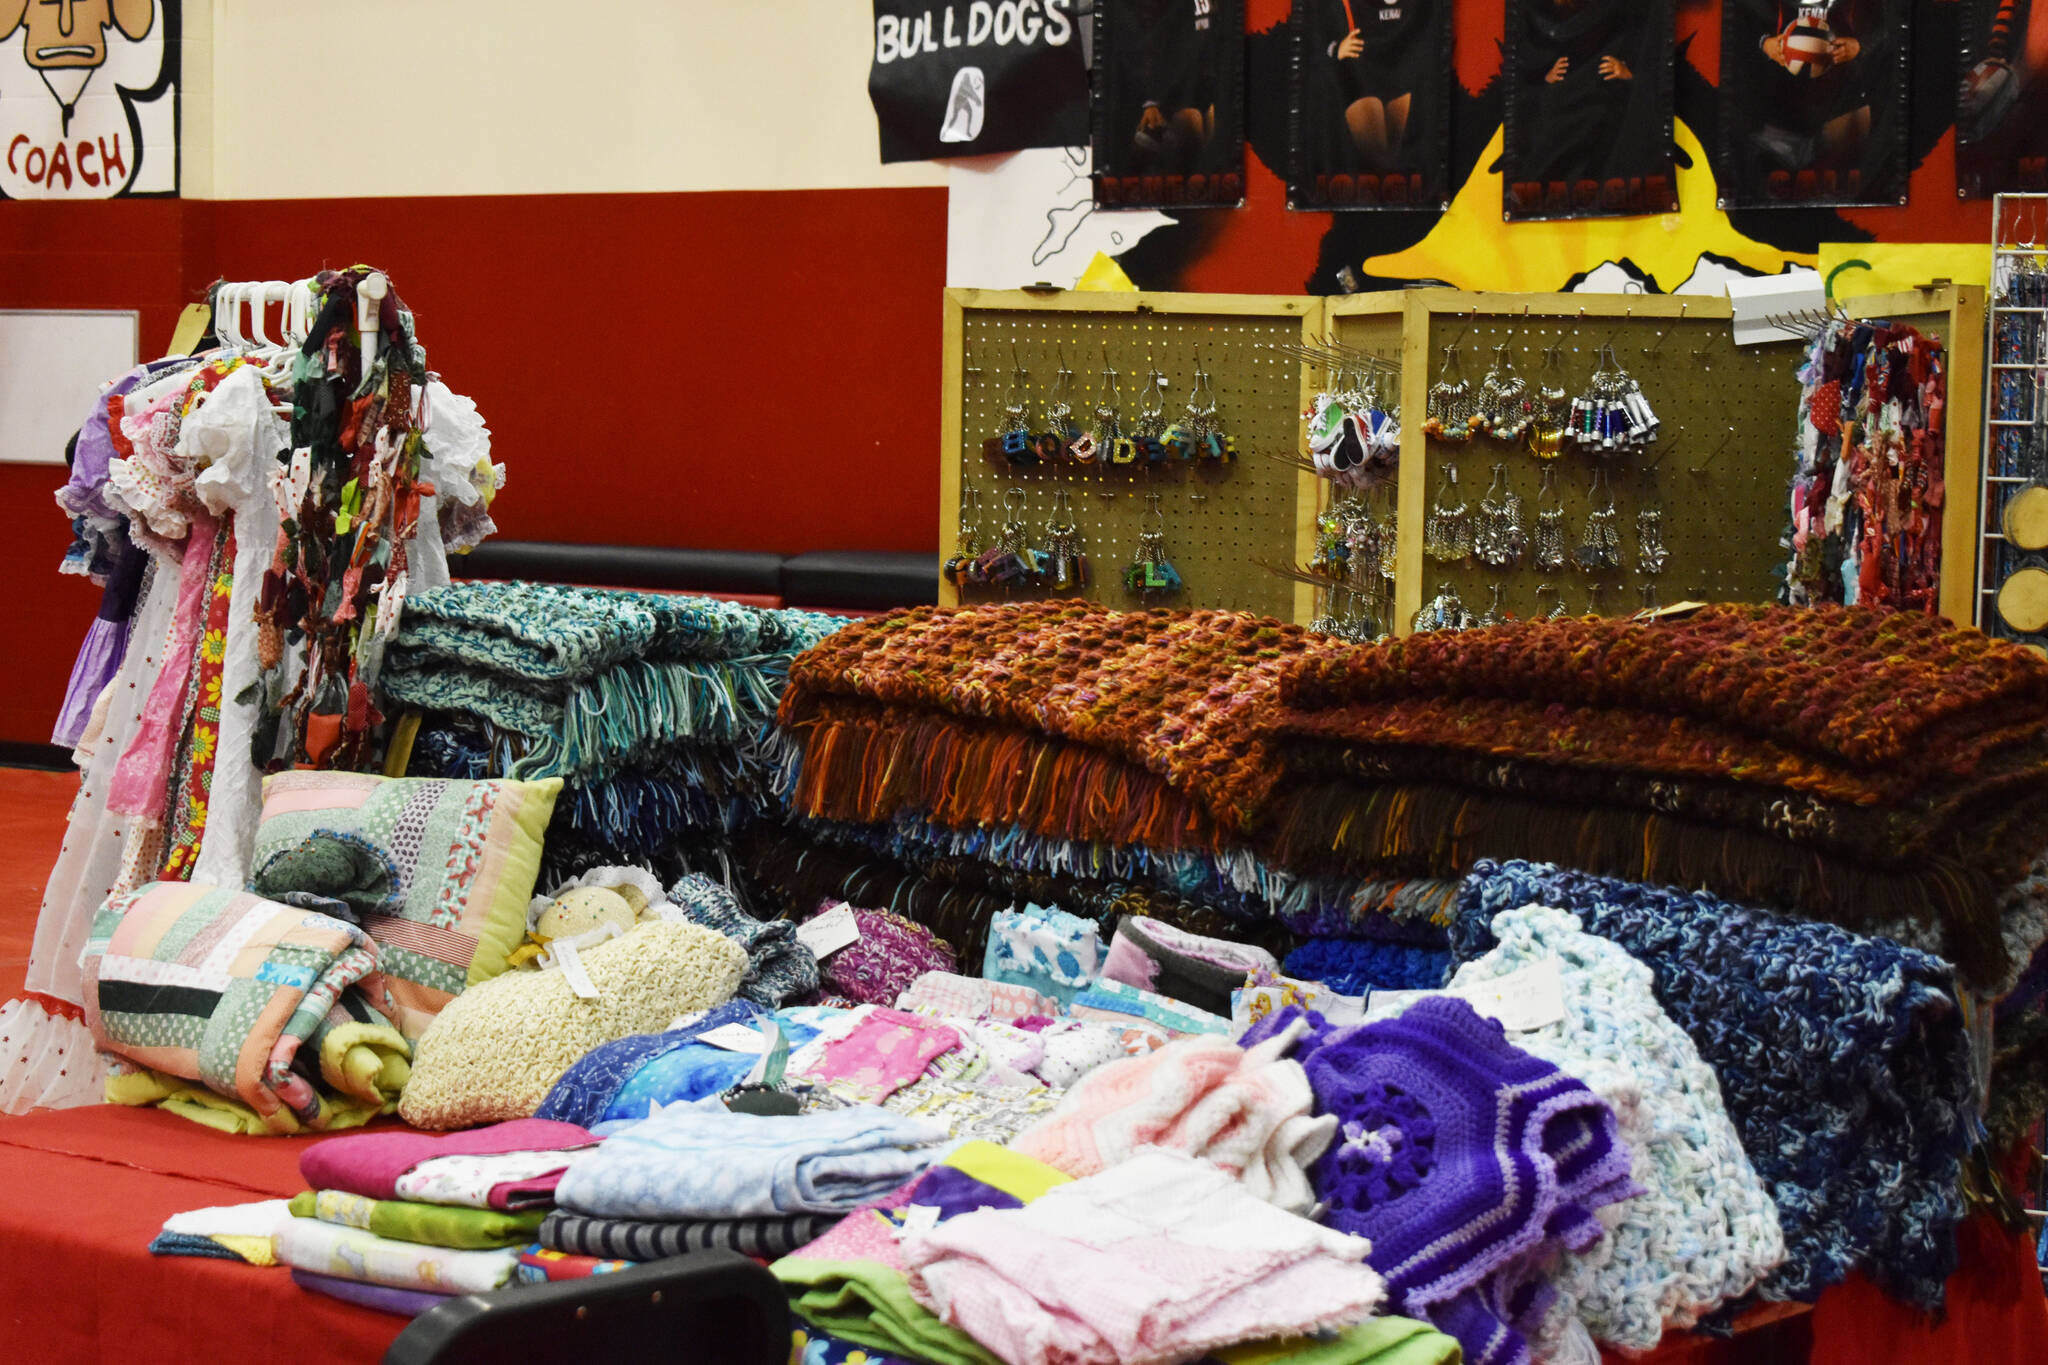 Blankets and other knit and crafted cloth products are seen, ready to be sold, ahead of the Kenai Arts & Crafts Fair during early set up at Kenai Central High School in Kenai, Alaska, on Wednesday, Nov. 23, 2022. (Jake Dye/Peninsula Clarion)